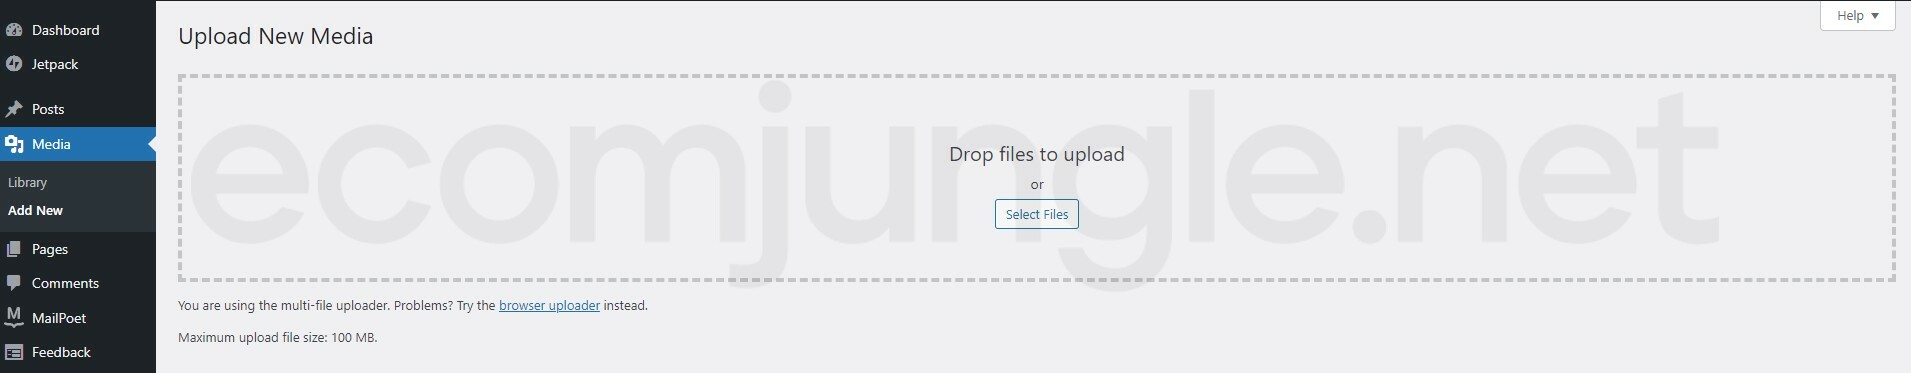 ou can drag and drop files to this area to upload, or you can click Select Files to search for the media